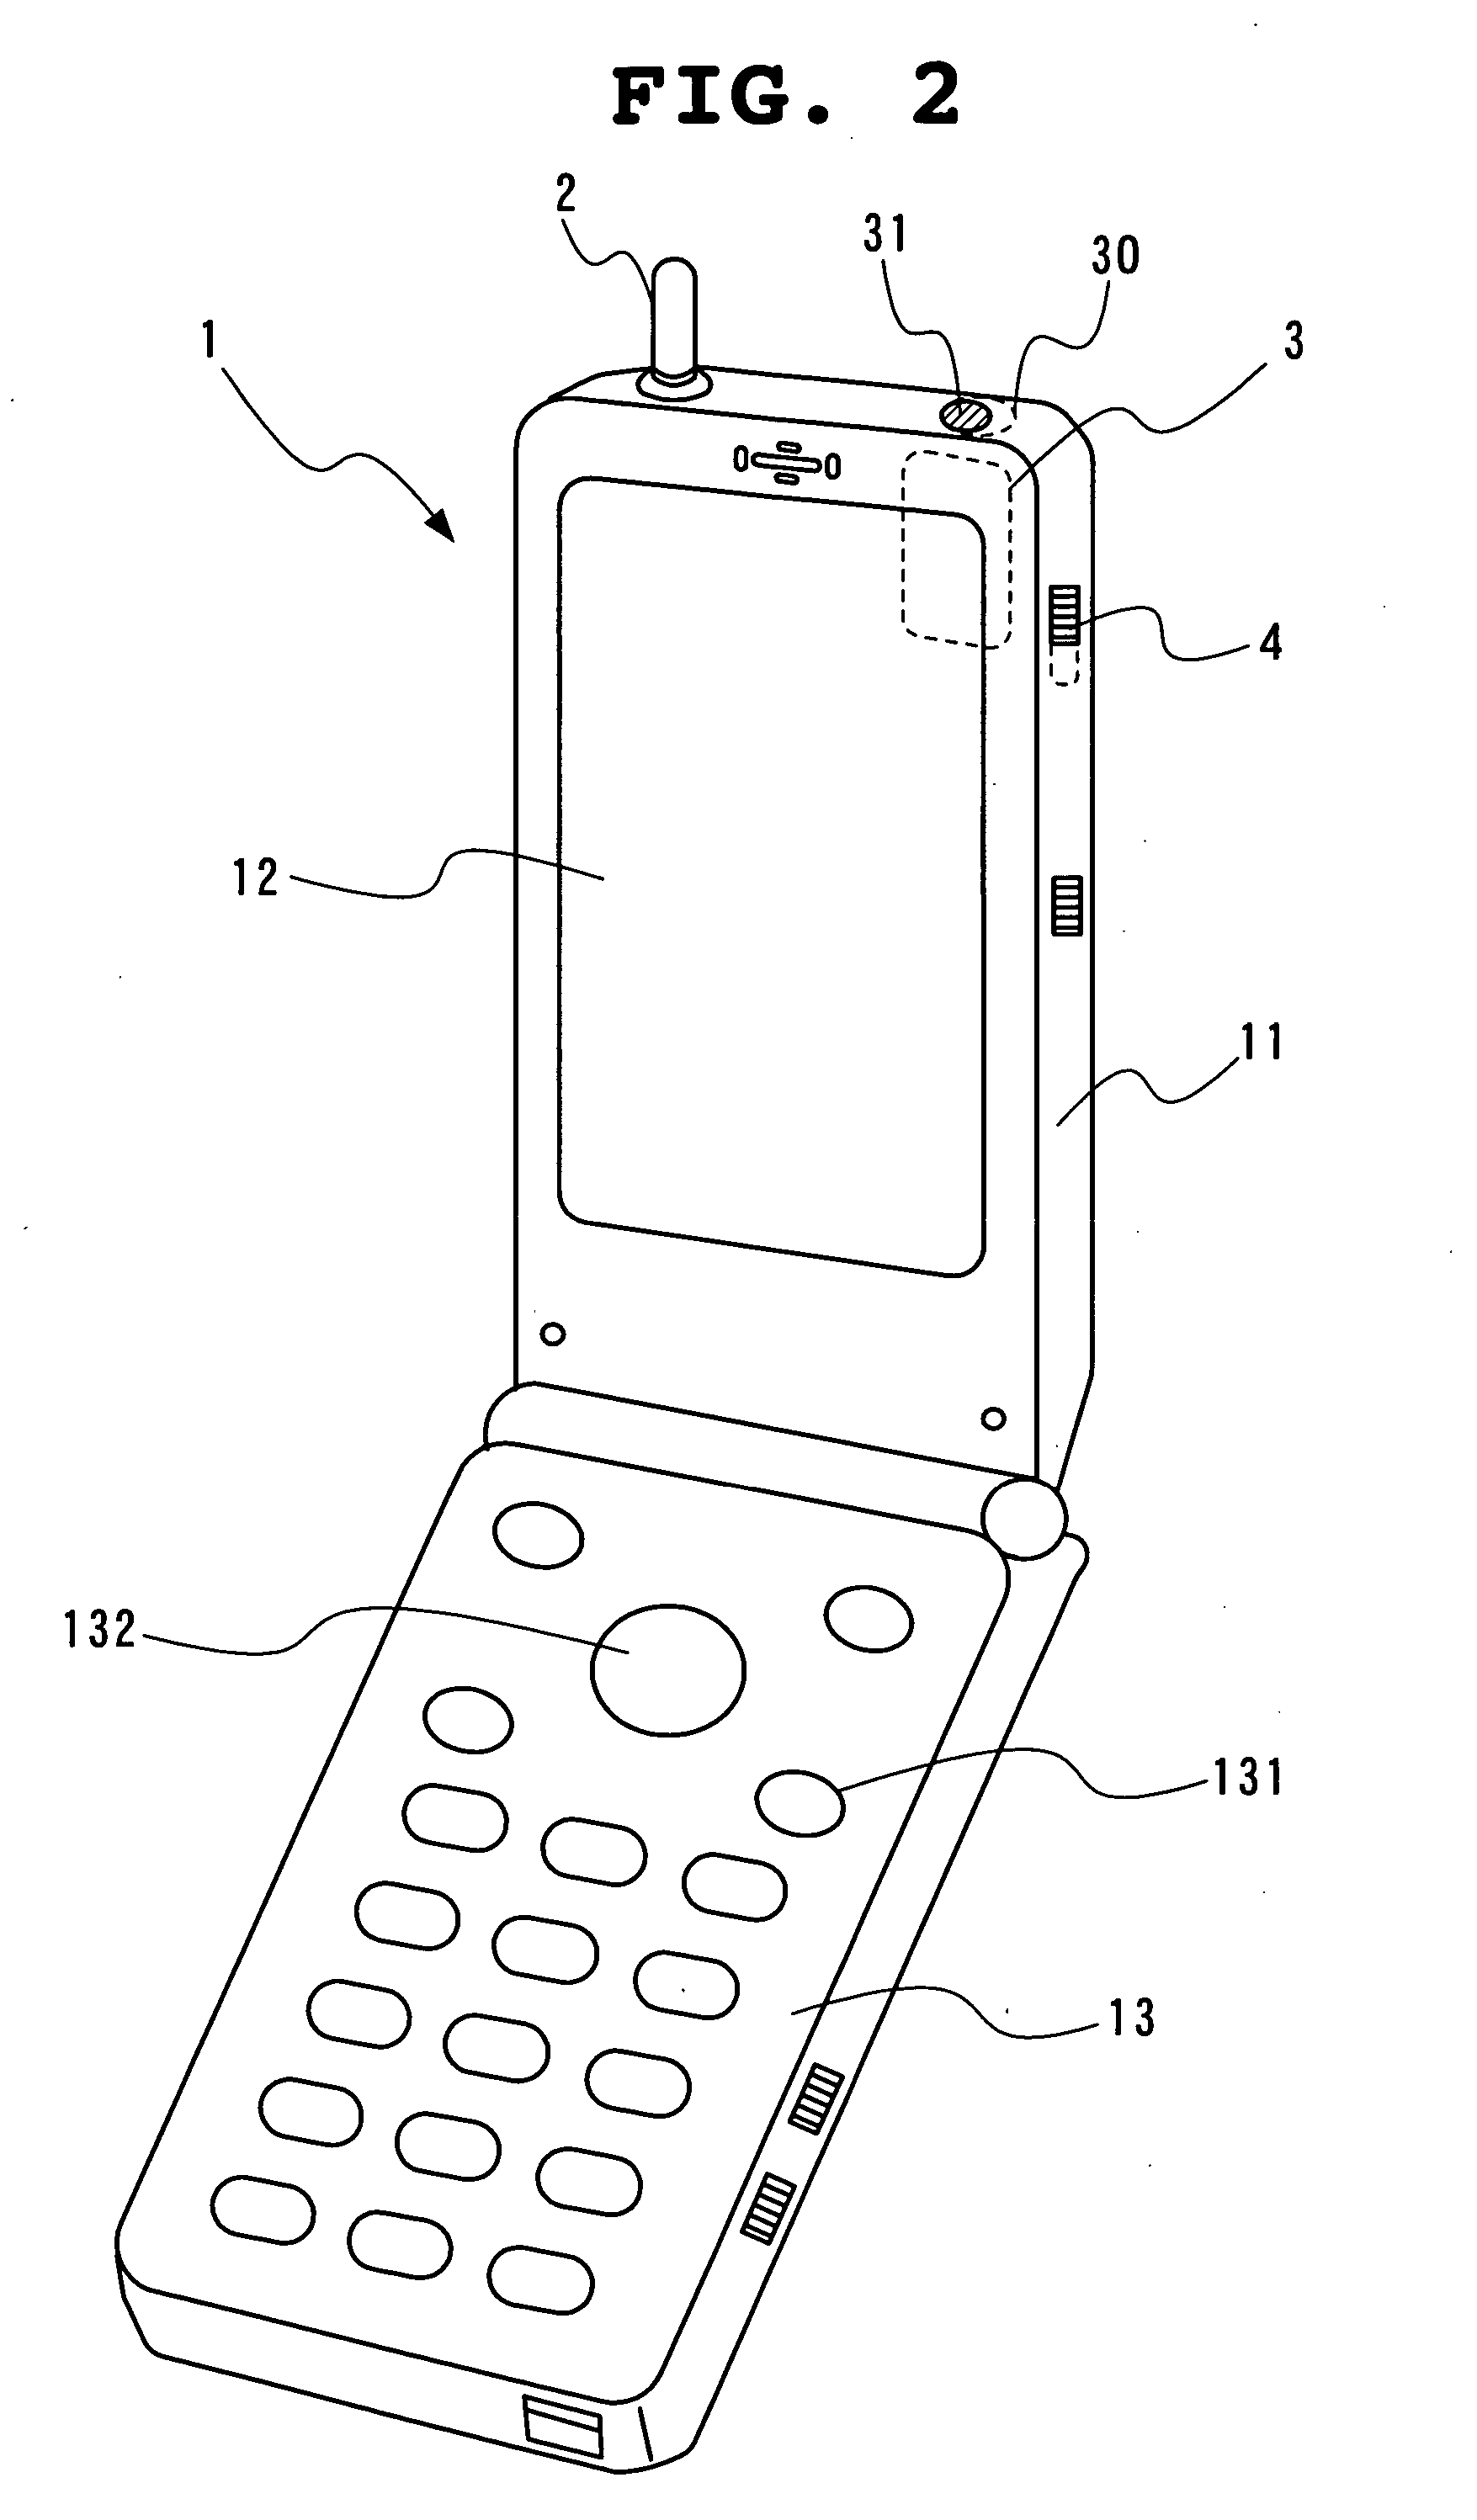 Portable electronic equipment with integrated lighter